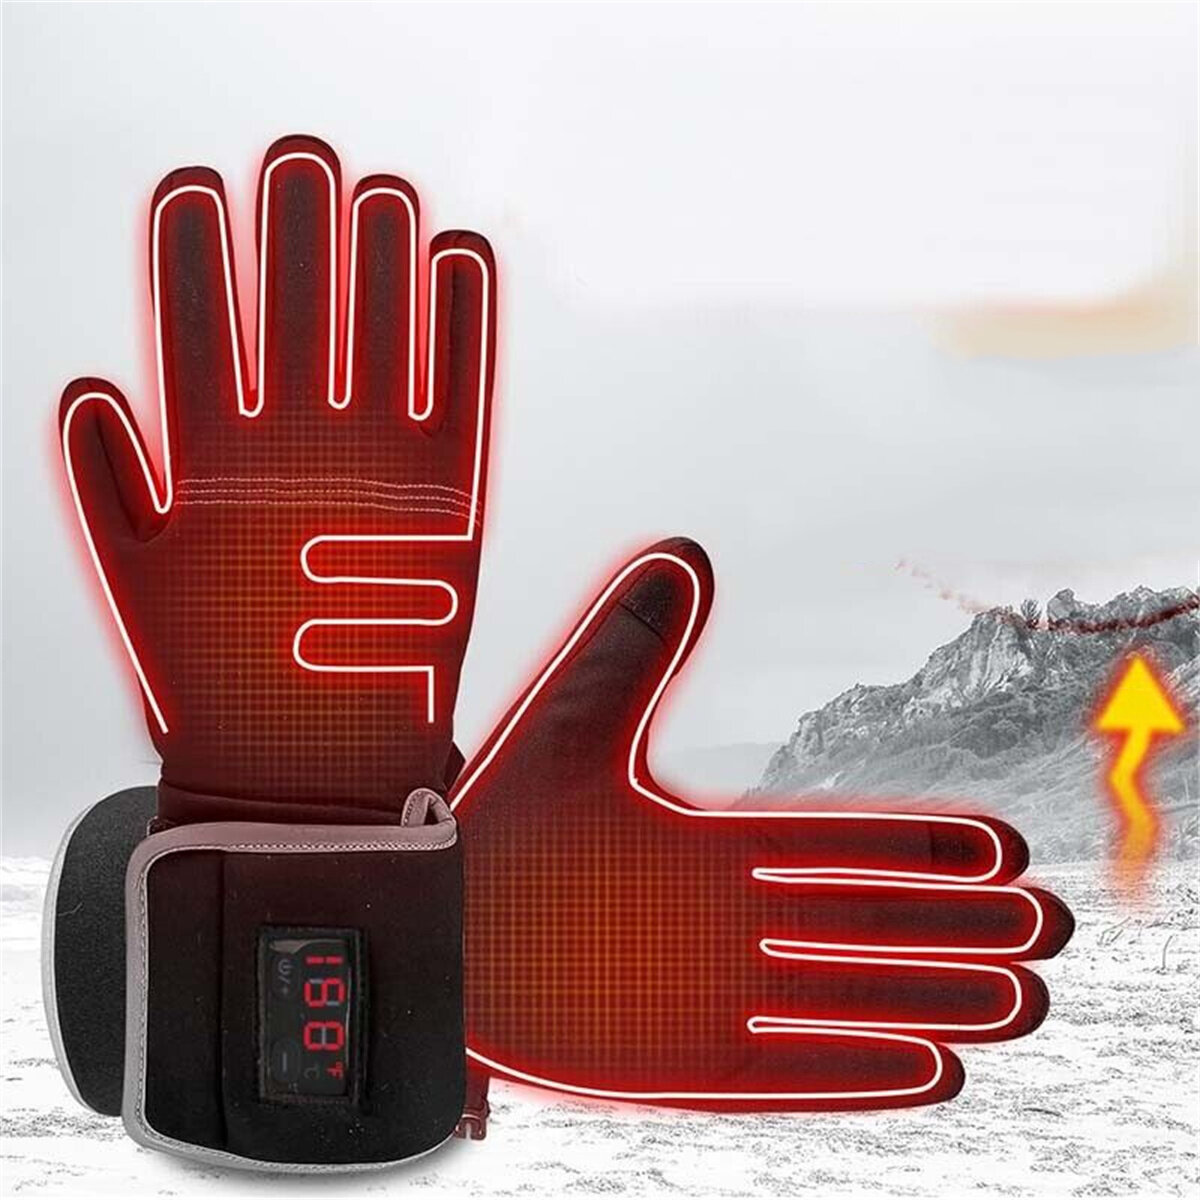 Electric Heated Gloves Rechargeable 2200mAh Waterproof Warm for Women Men with LED Temperature Display for Sports Outdoor Ski Motorcycle Hunting